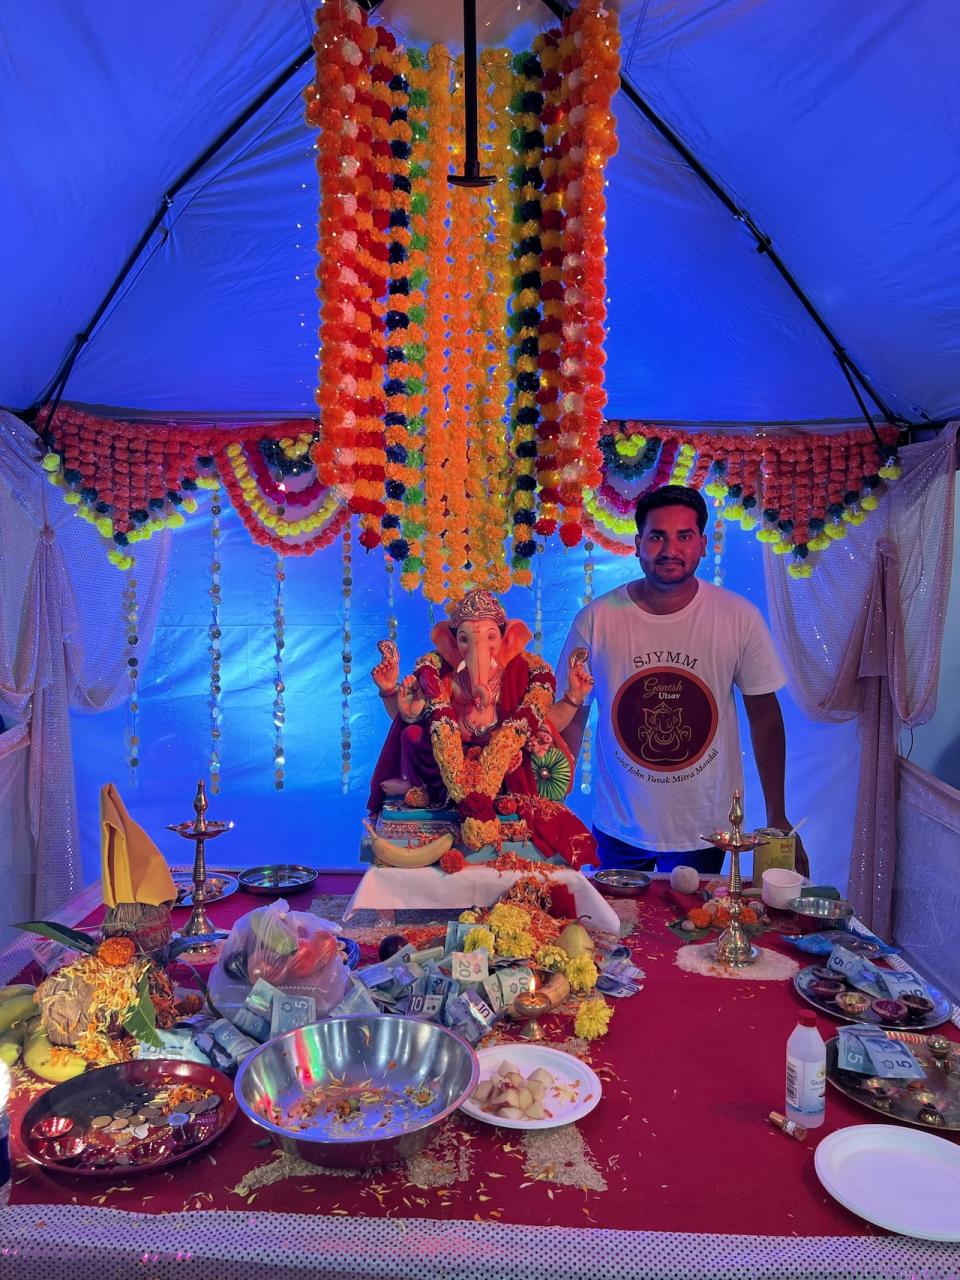 Jeentendra Singh has celebrated this festival since his childhood in Mumbai. He and his friends started Saint John Yuvak Mitra Mandal as a way to help Indian newcomers feel at home and build community in Saint John. 